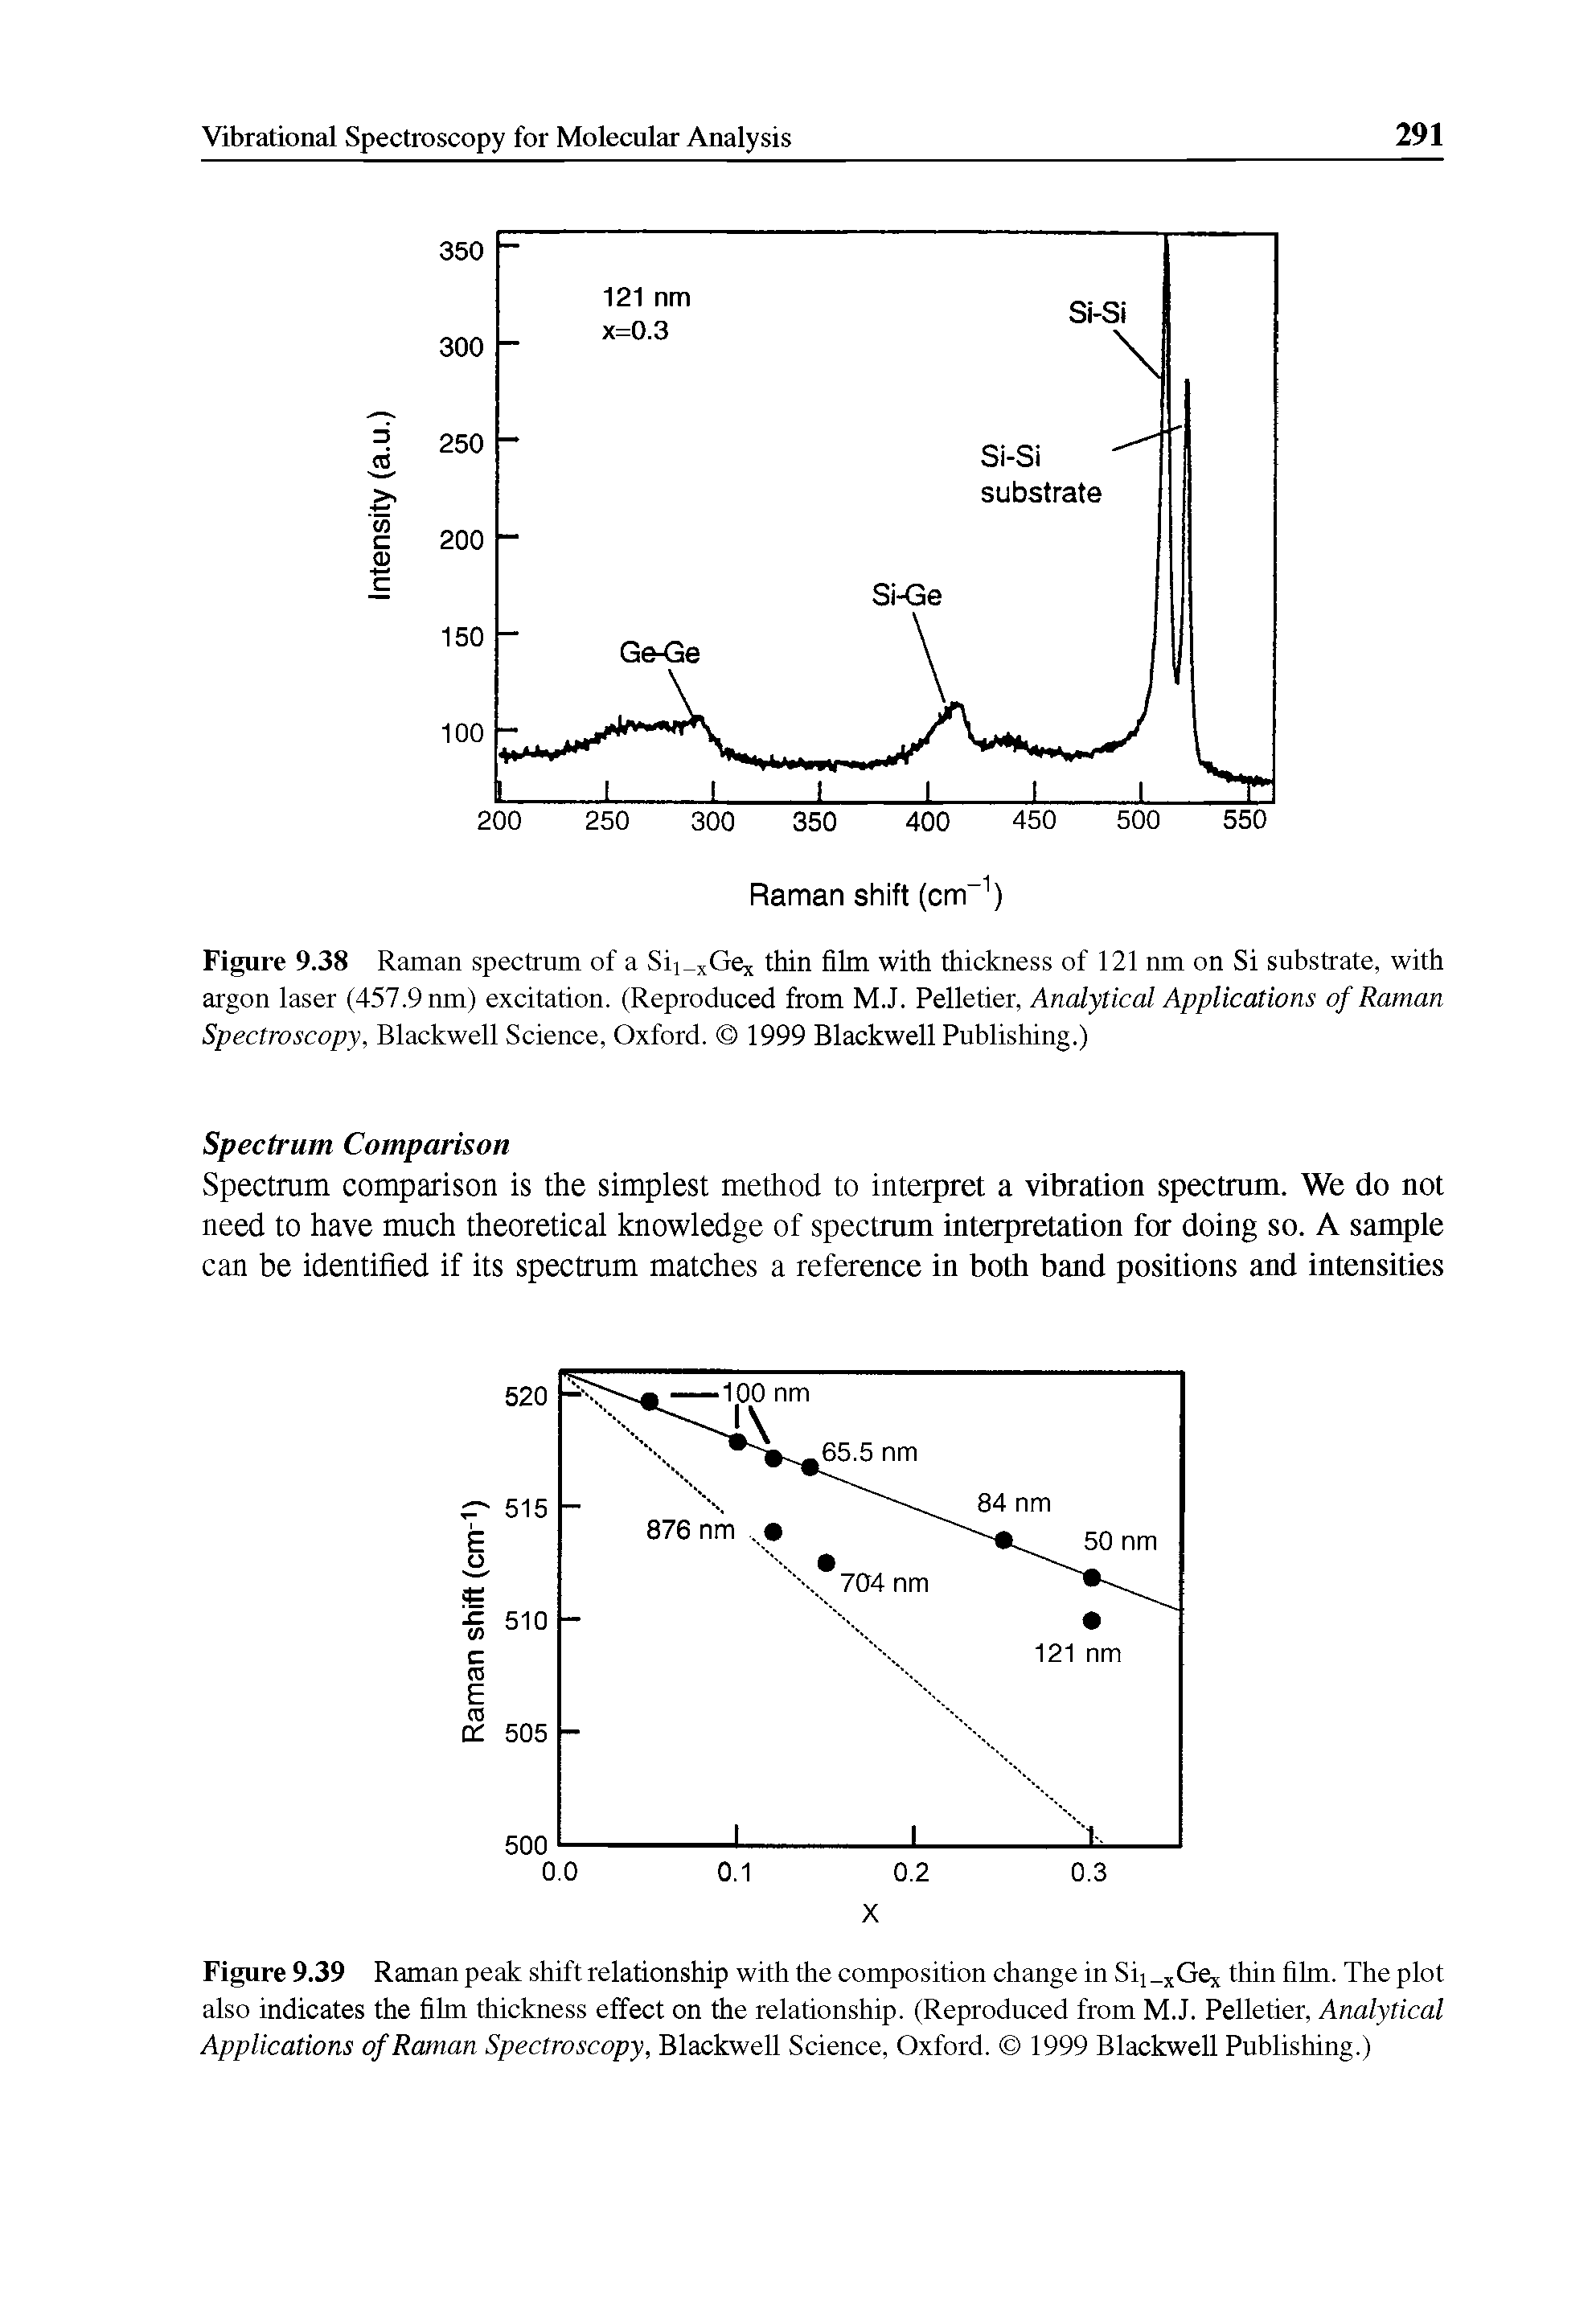 Figure 9.39 Raman peak shift relationship with the composition change in Sij xGex thin film. The plot also indicates the film thickness effect on the relationship. (Reproduced from M.J. Pelletier, Analytical Applications of Raman Spectroscopy, Blackwell Science, Oxford. 1999 Blackwell Publishing.)...